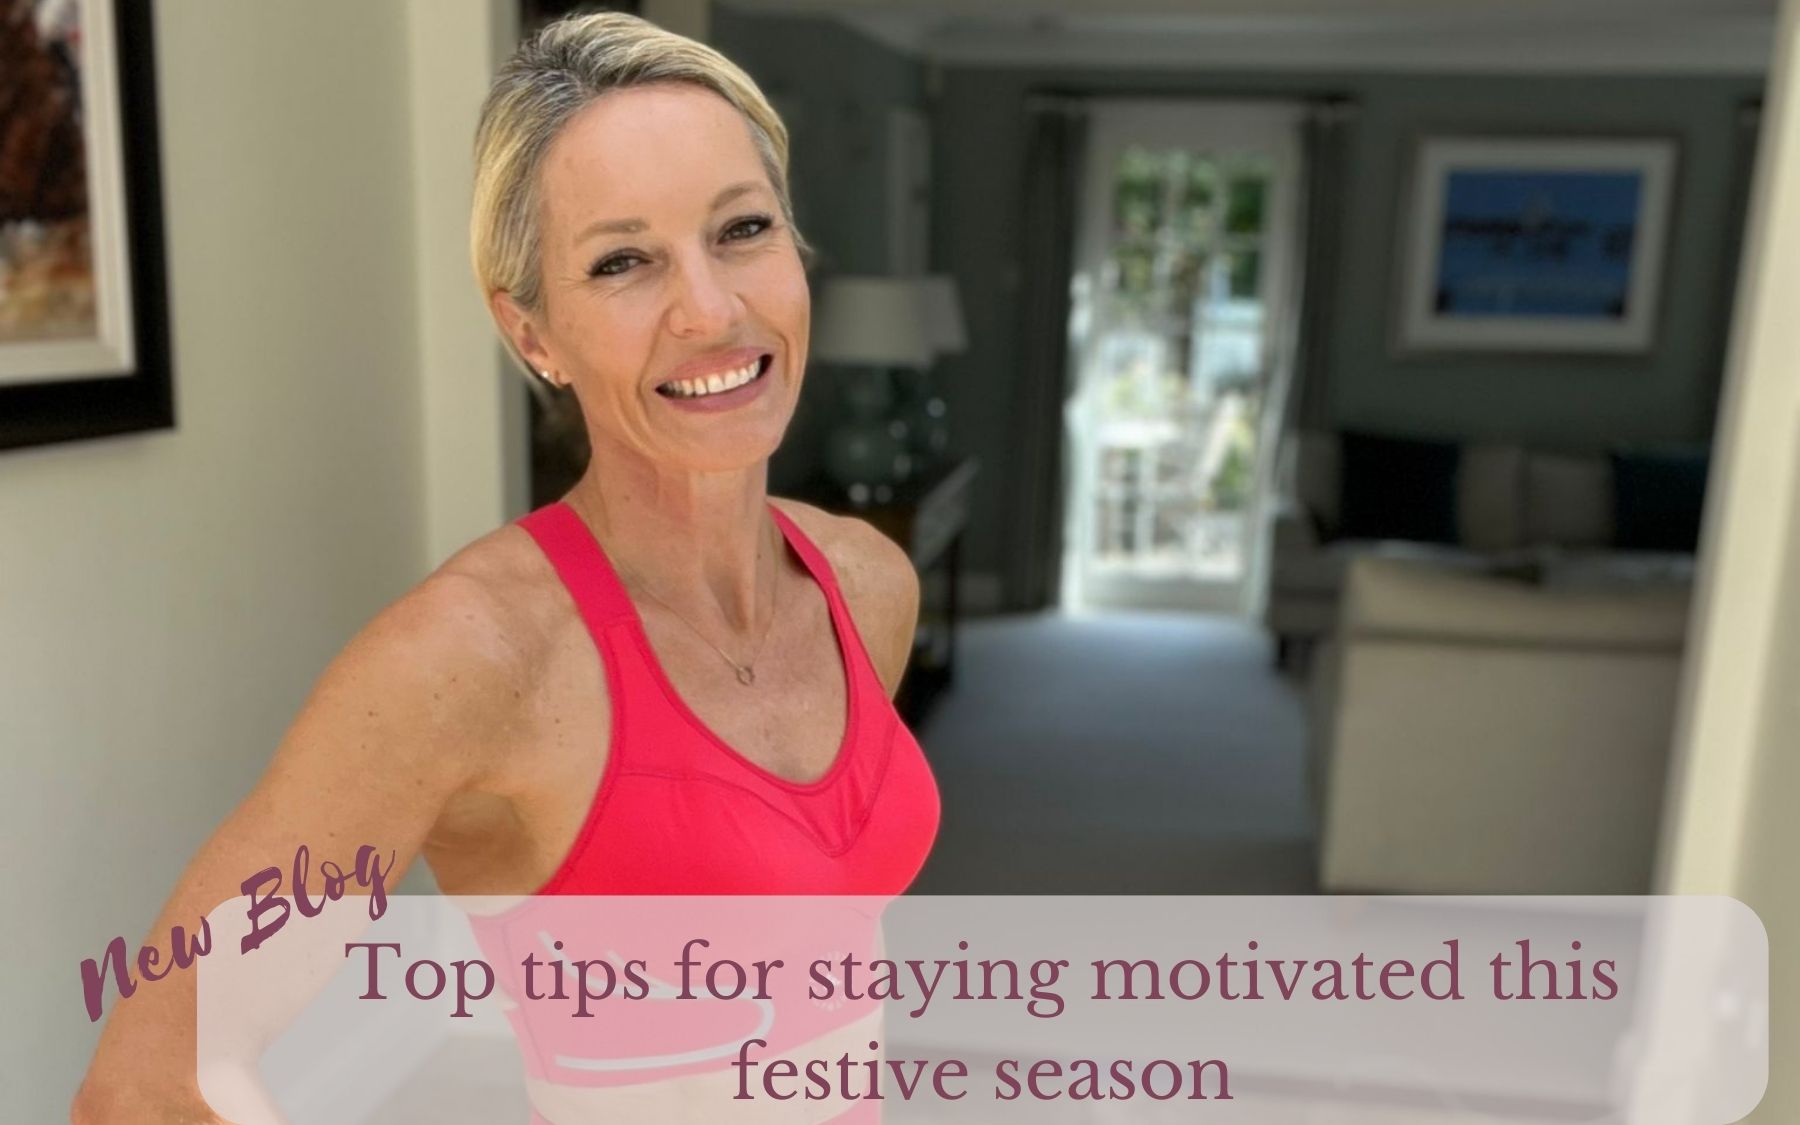 Tips to stay motivated in party season